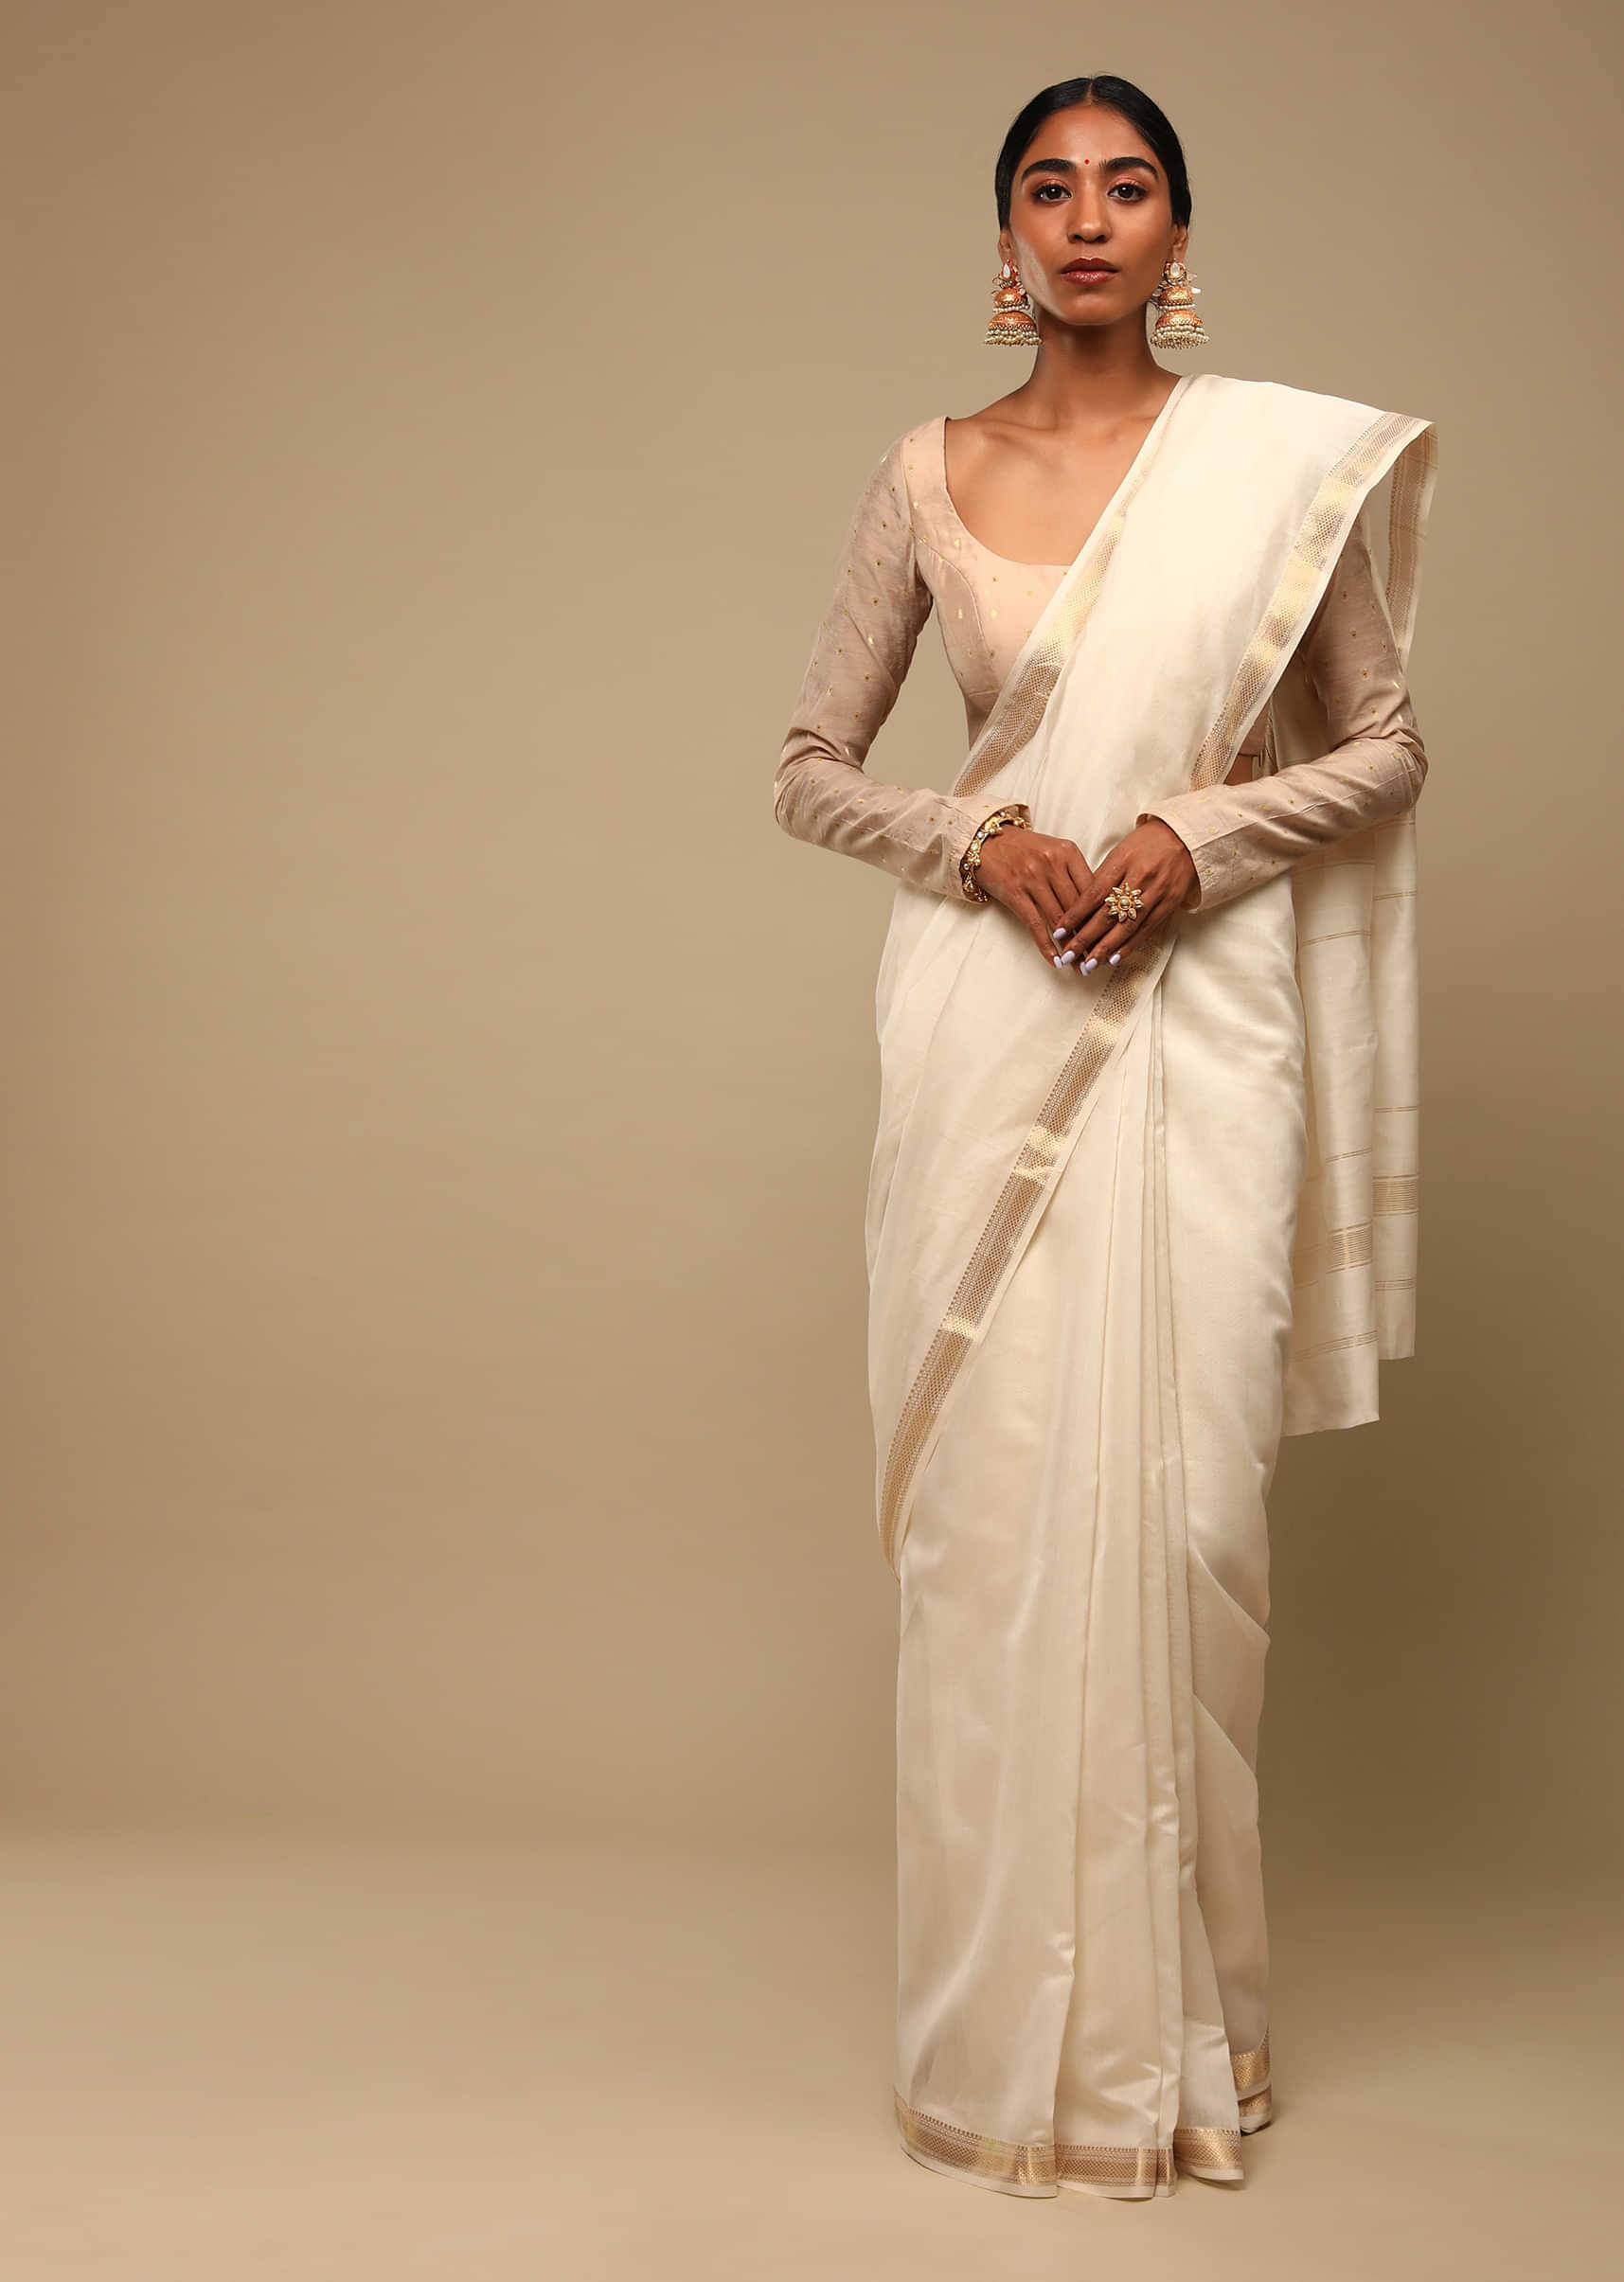 Powder White Saree In Cotton Silk With Woven Golden Stripe Detailing And Unstitched Blouse  